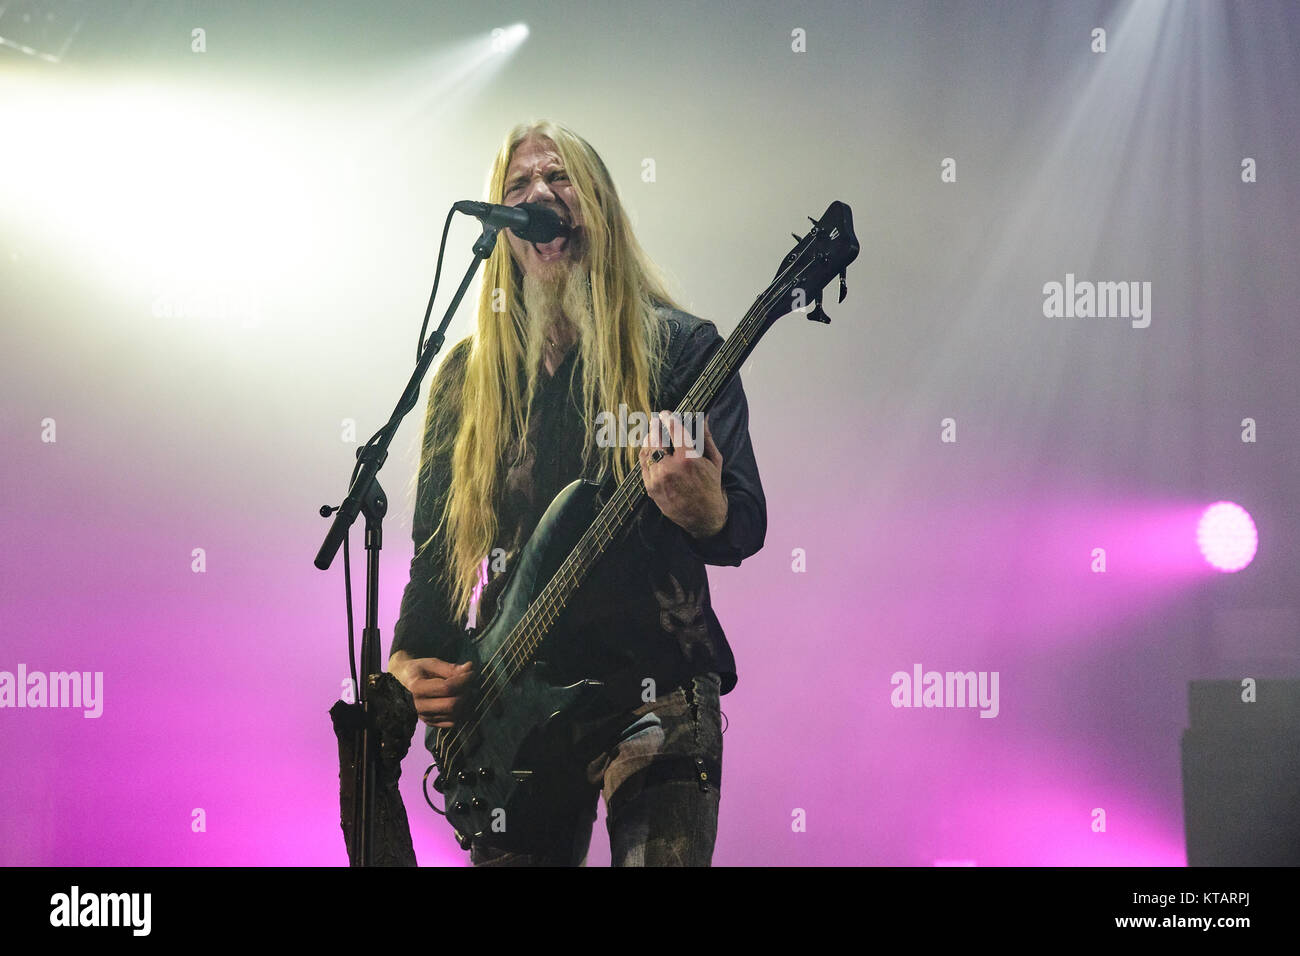 Nightwish, the Finnish symphonic metal band, performs a live concert at Falconer Salen in Copenhagen. Here bass player Marco Hietala is seen live on stage. Denmark, 16/11 2015. Stock Photo